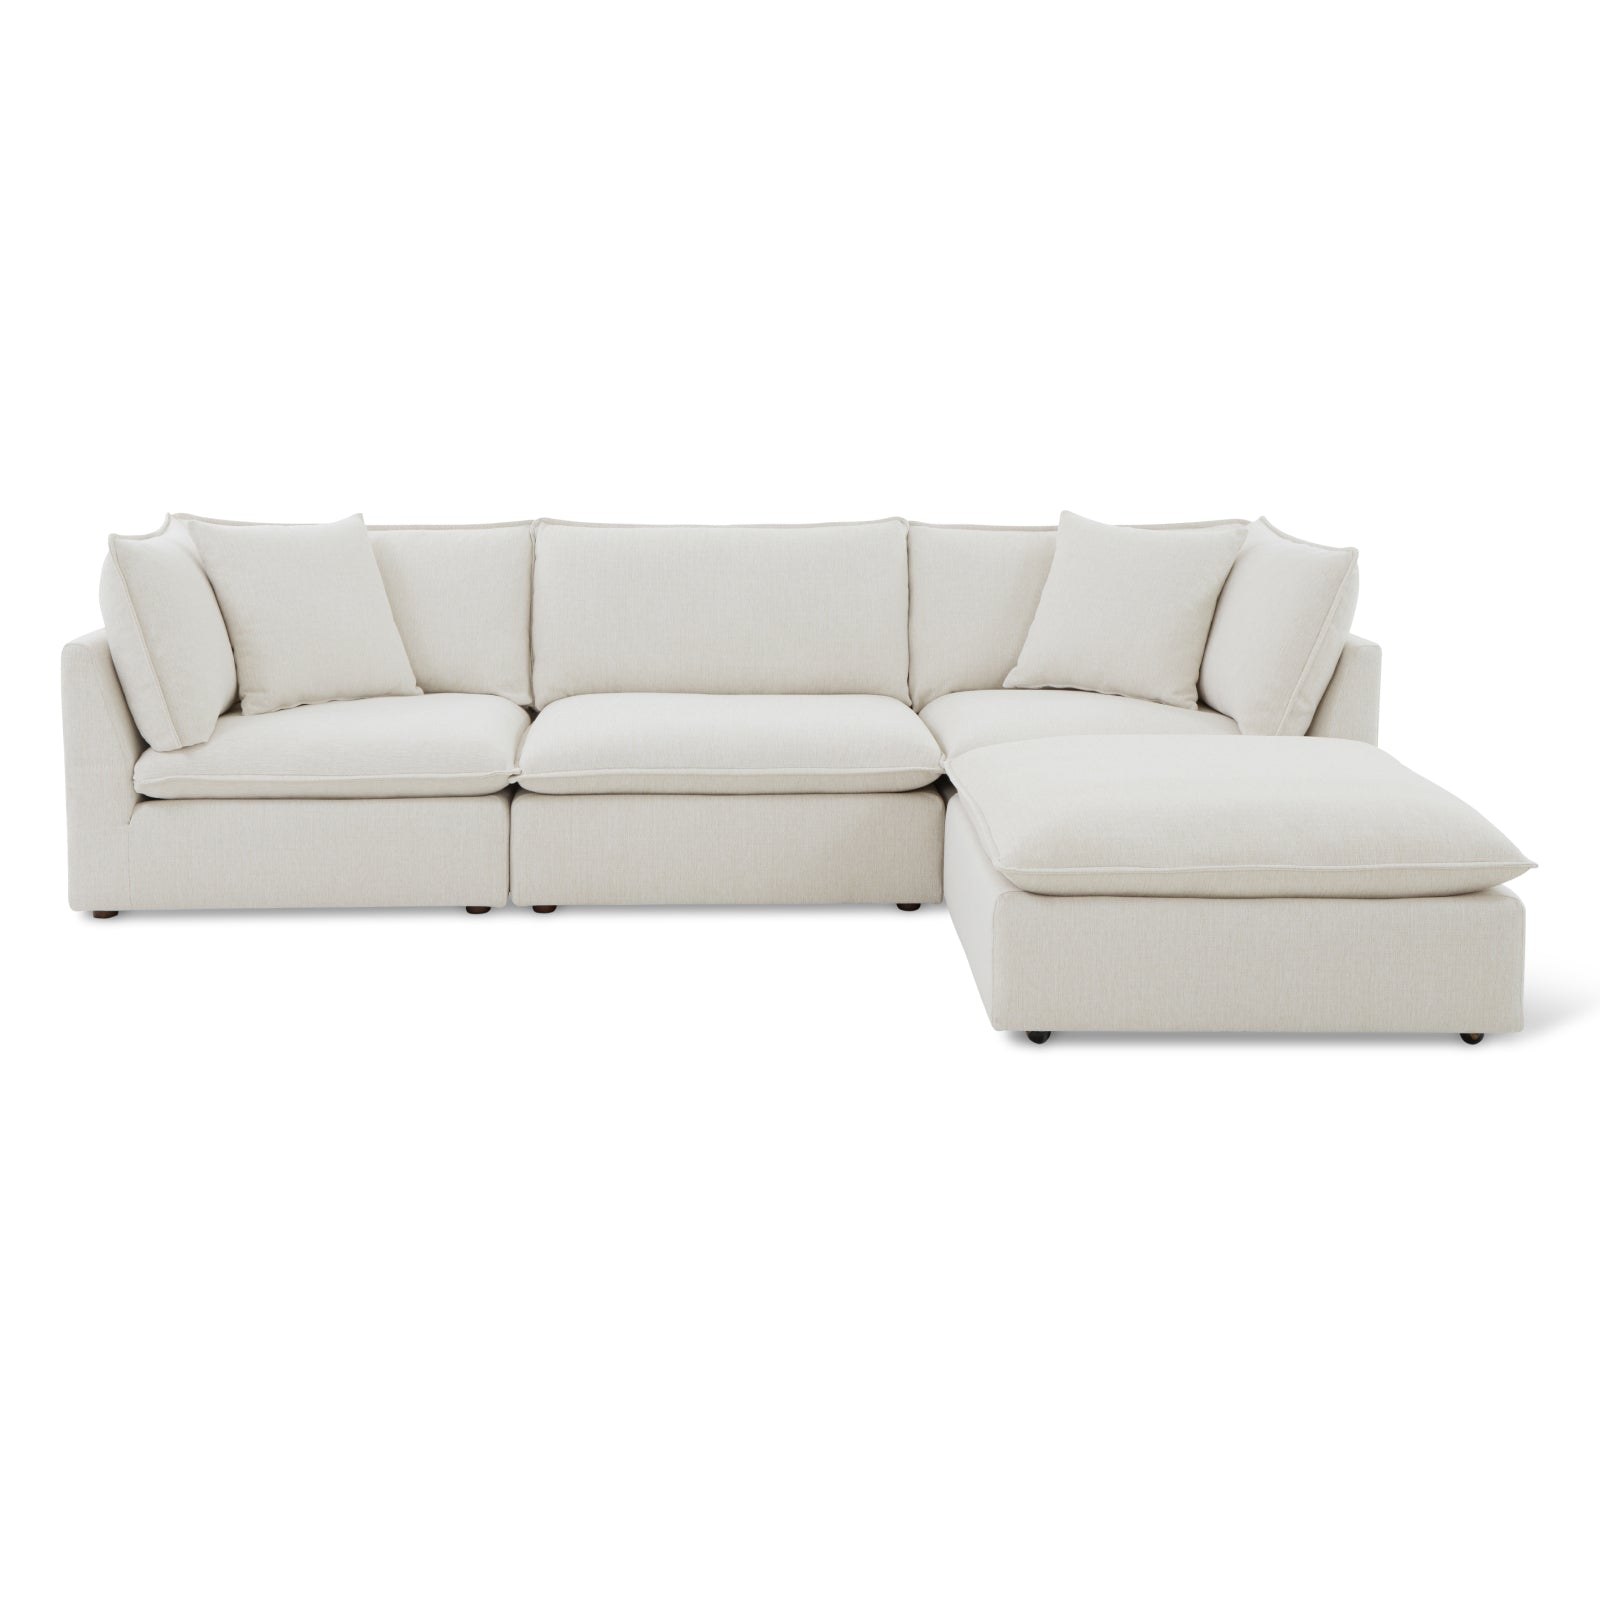 Chill Time 4-Piece Modular Sectional, Birch - Image 11